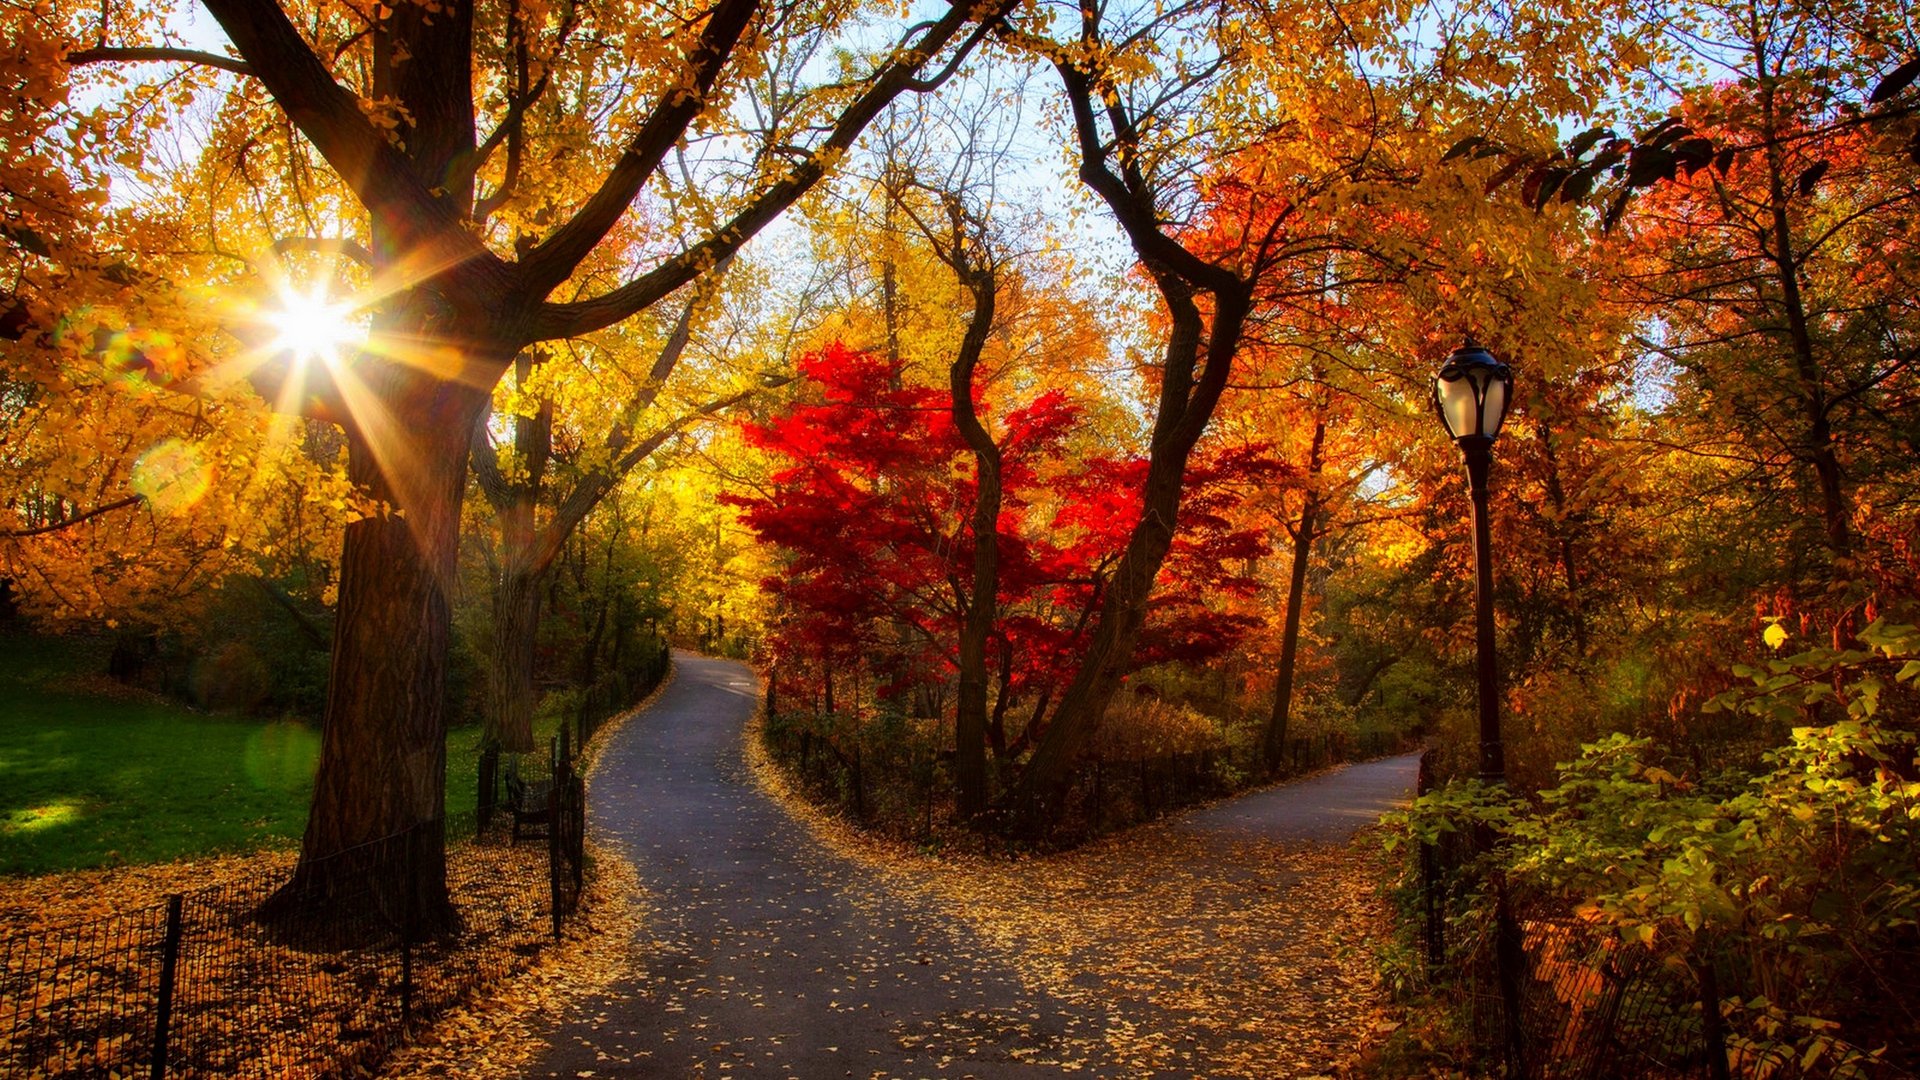 Sunrise View of Park Trees and Foliage in Autumn Wallpaper